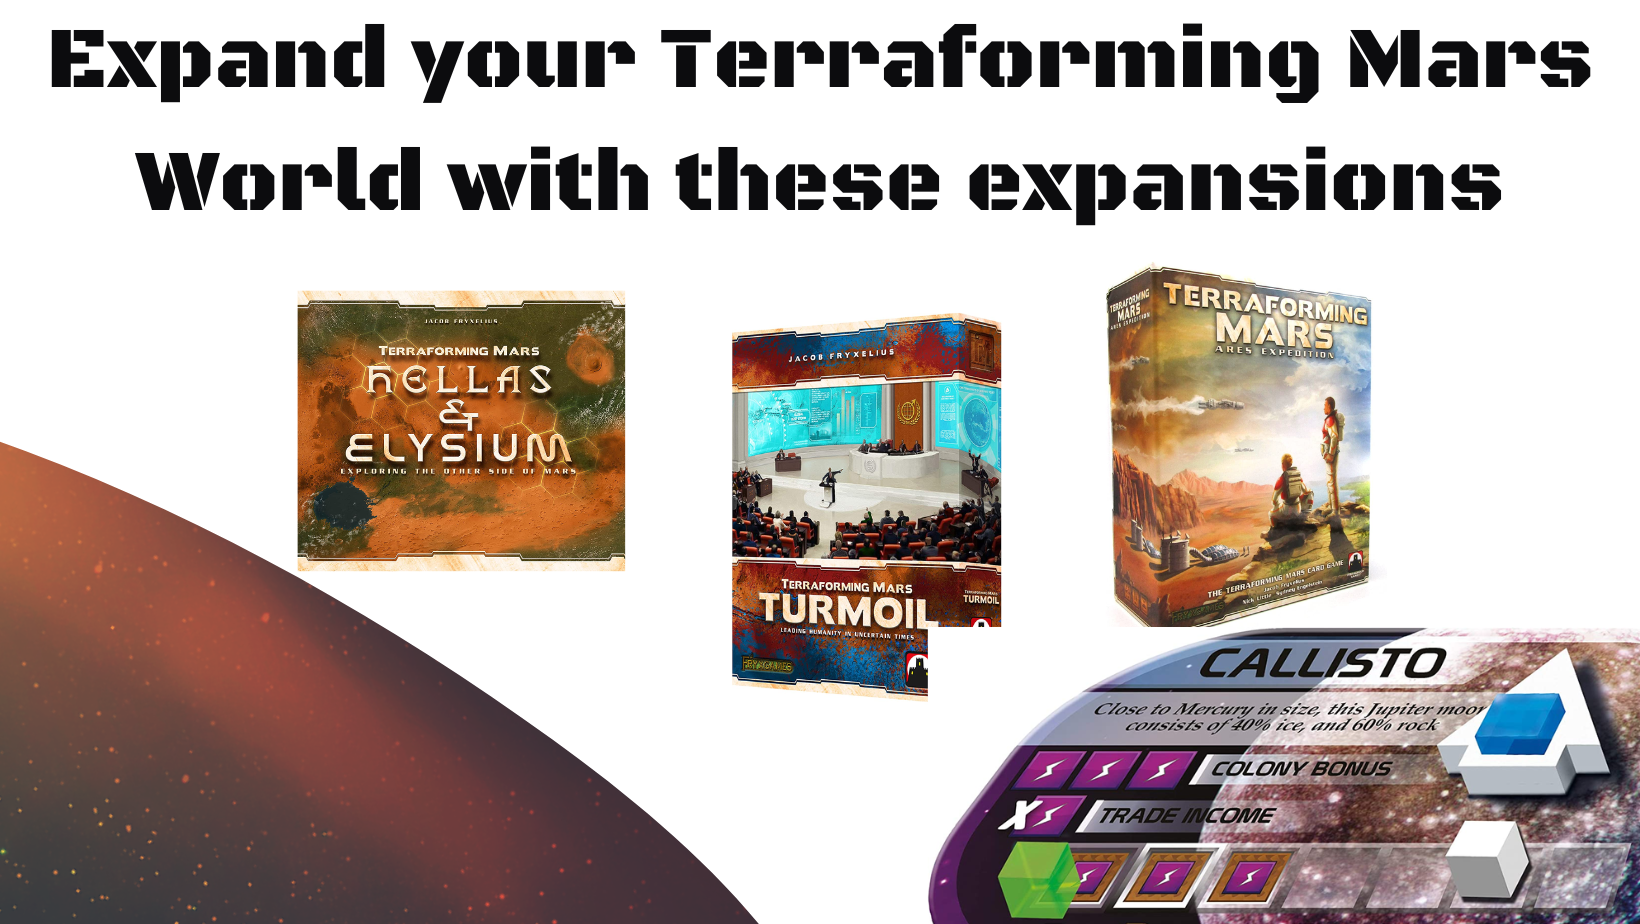 Terraforming Mars Expansions – face political turmoil, colonies and other planets